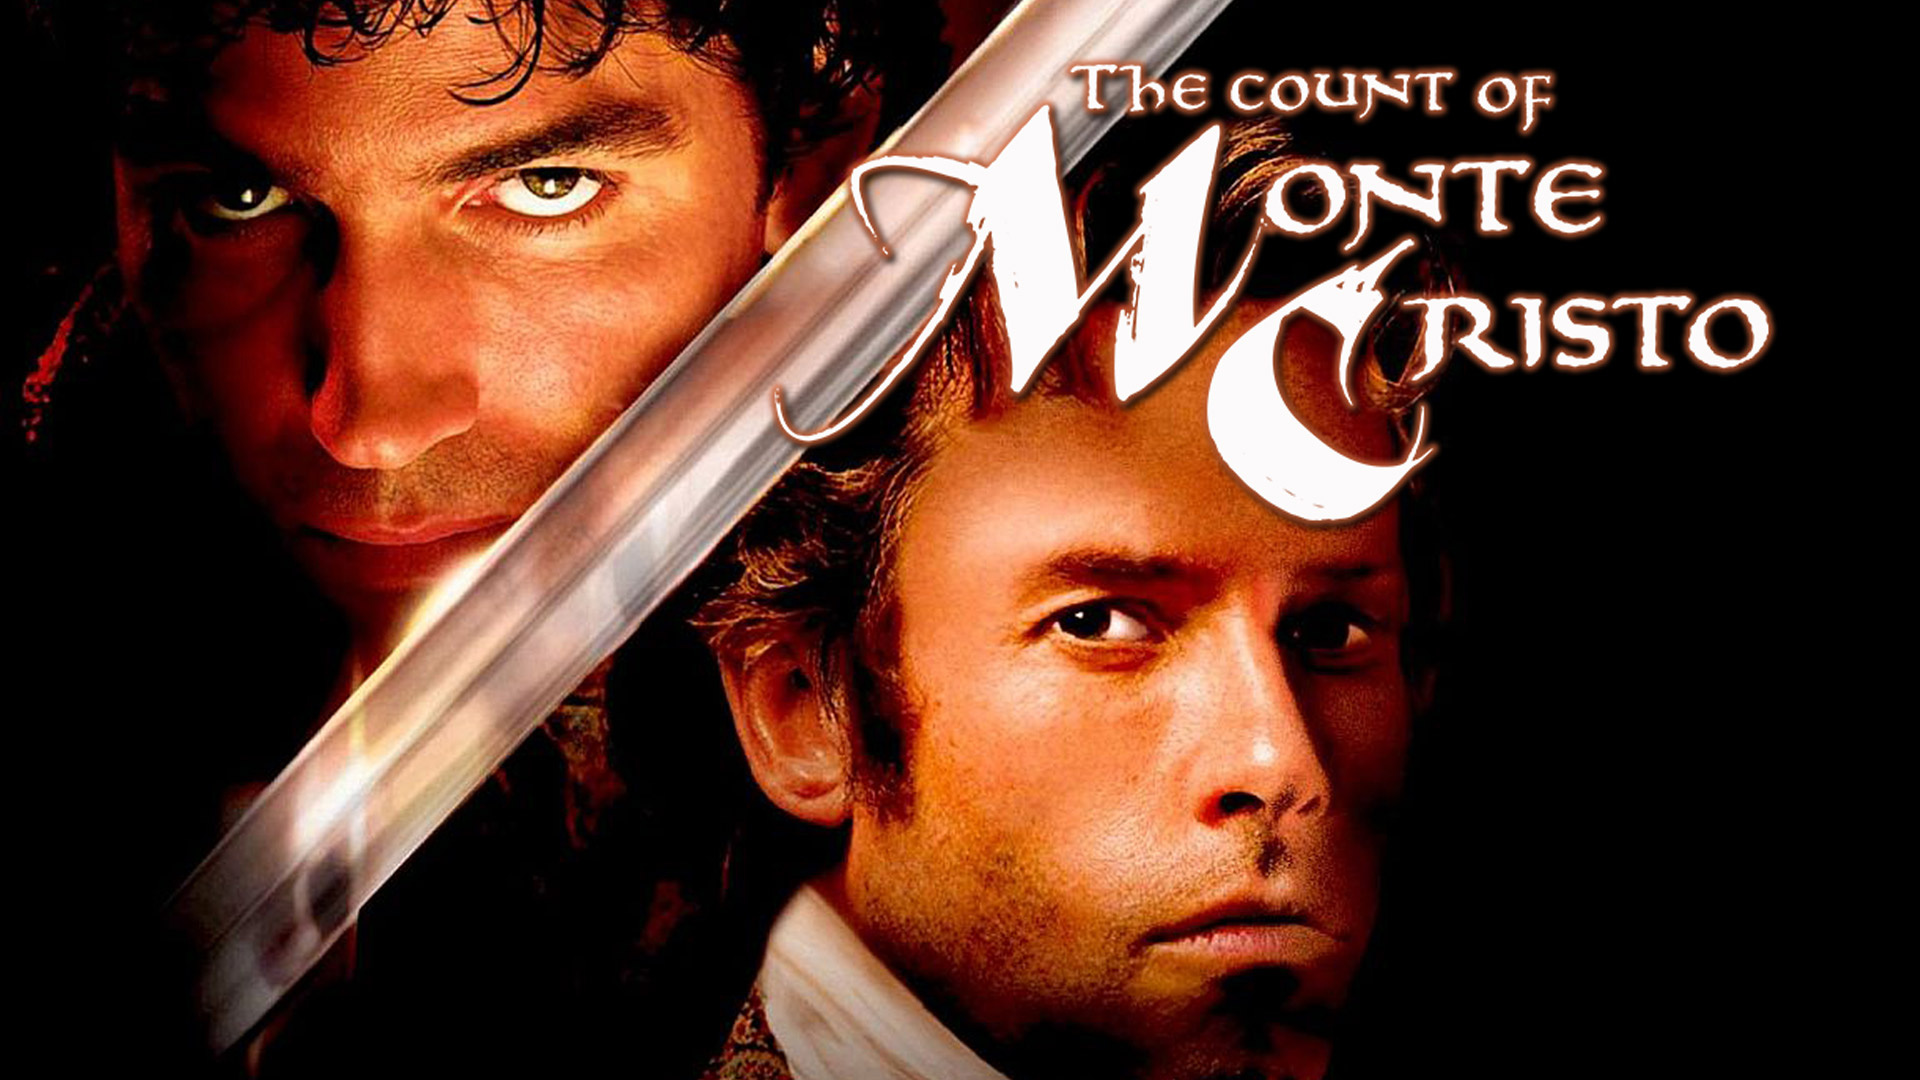 The Count of Monte Cristo, Epic adventure, Revenge story, Twists and turns, 1920x1080 Full HD Desktop